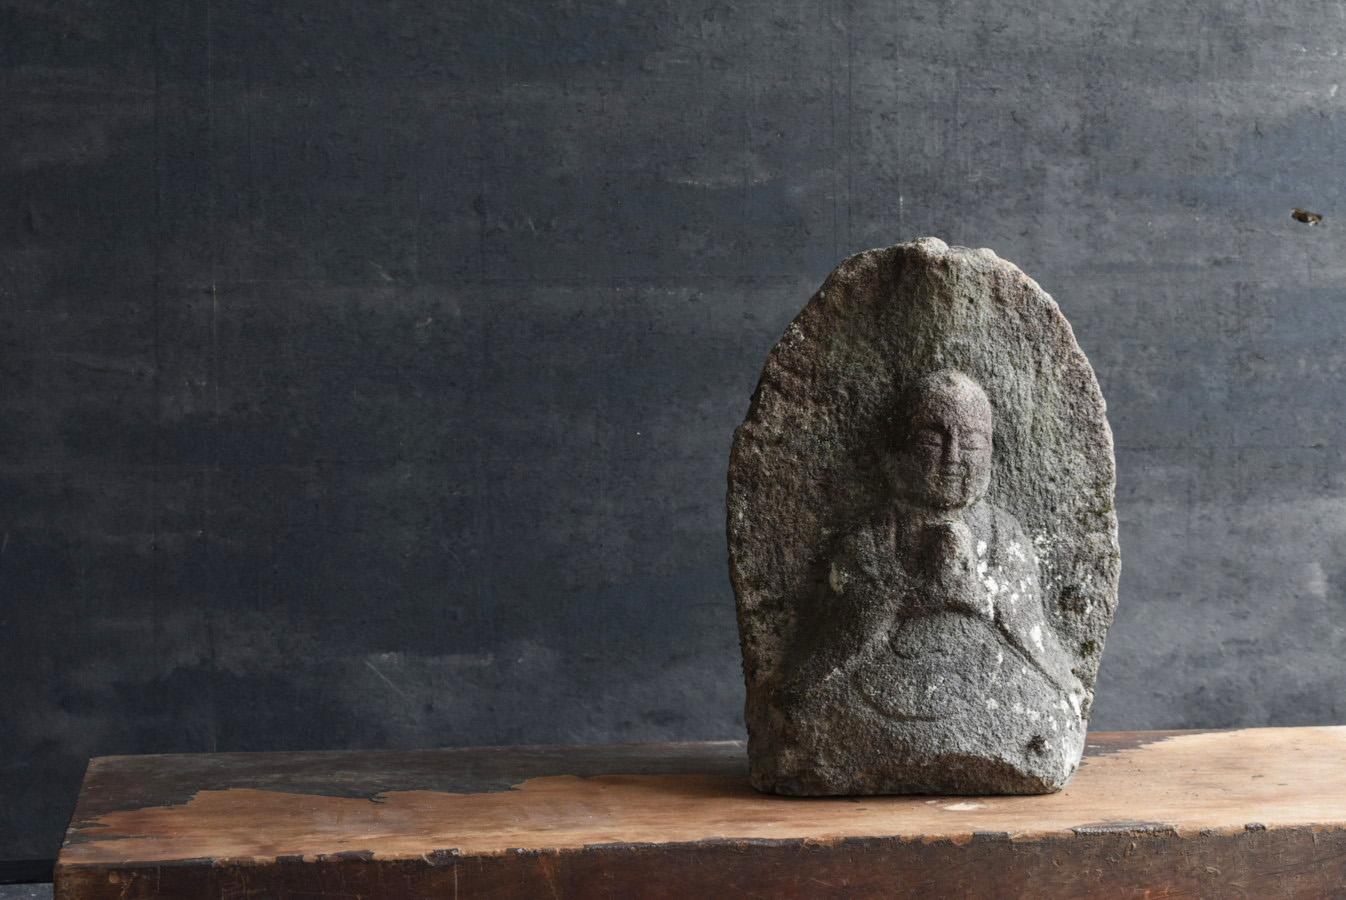 It is a stone Buddha statue of the Edo period (1750-1850) in Japan made of andesite.
This is the Jizo Bodhisattva who has joined hands.
Jizo is one of the bodhisattvas in the world of Buddhism.
It is the one who saves the people of the world with